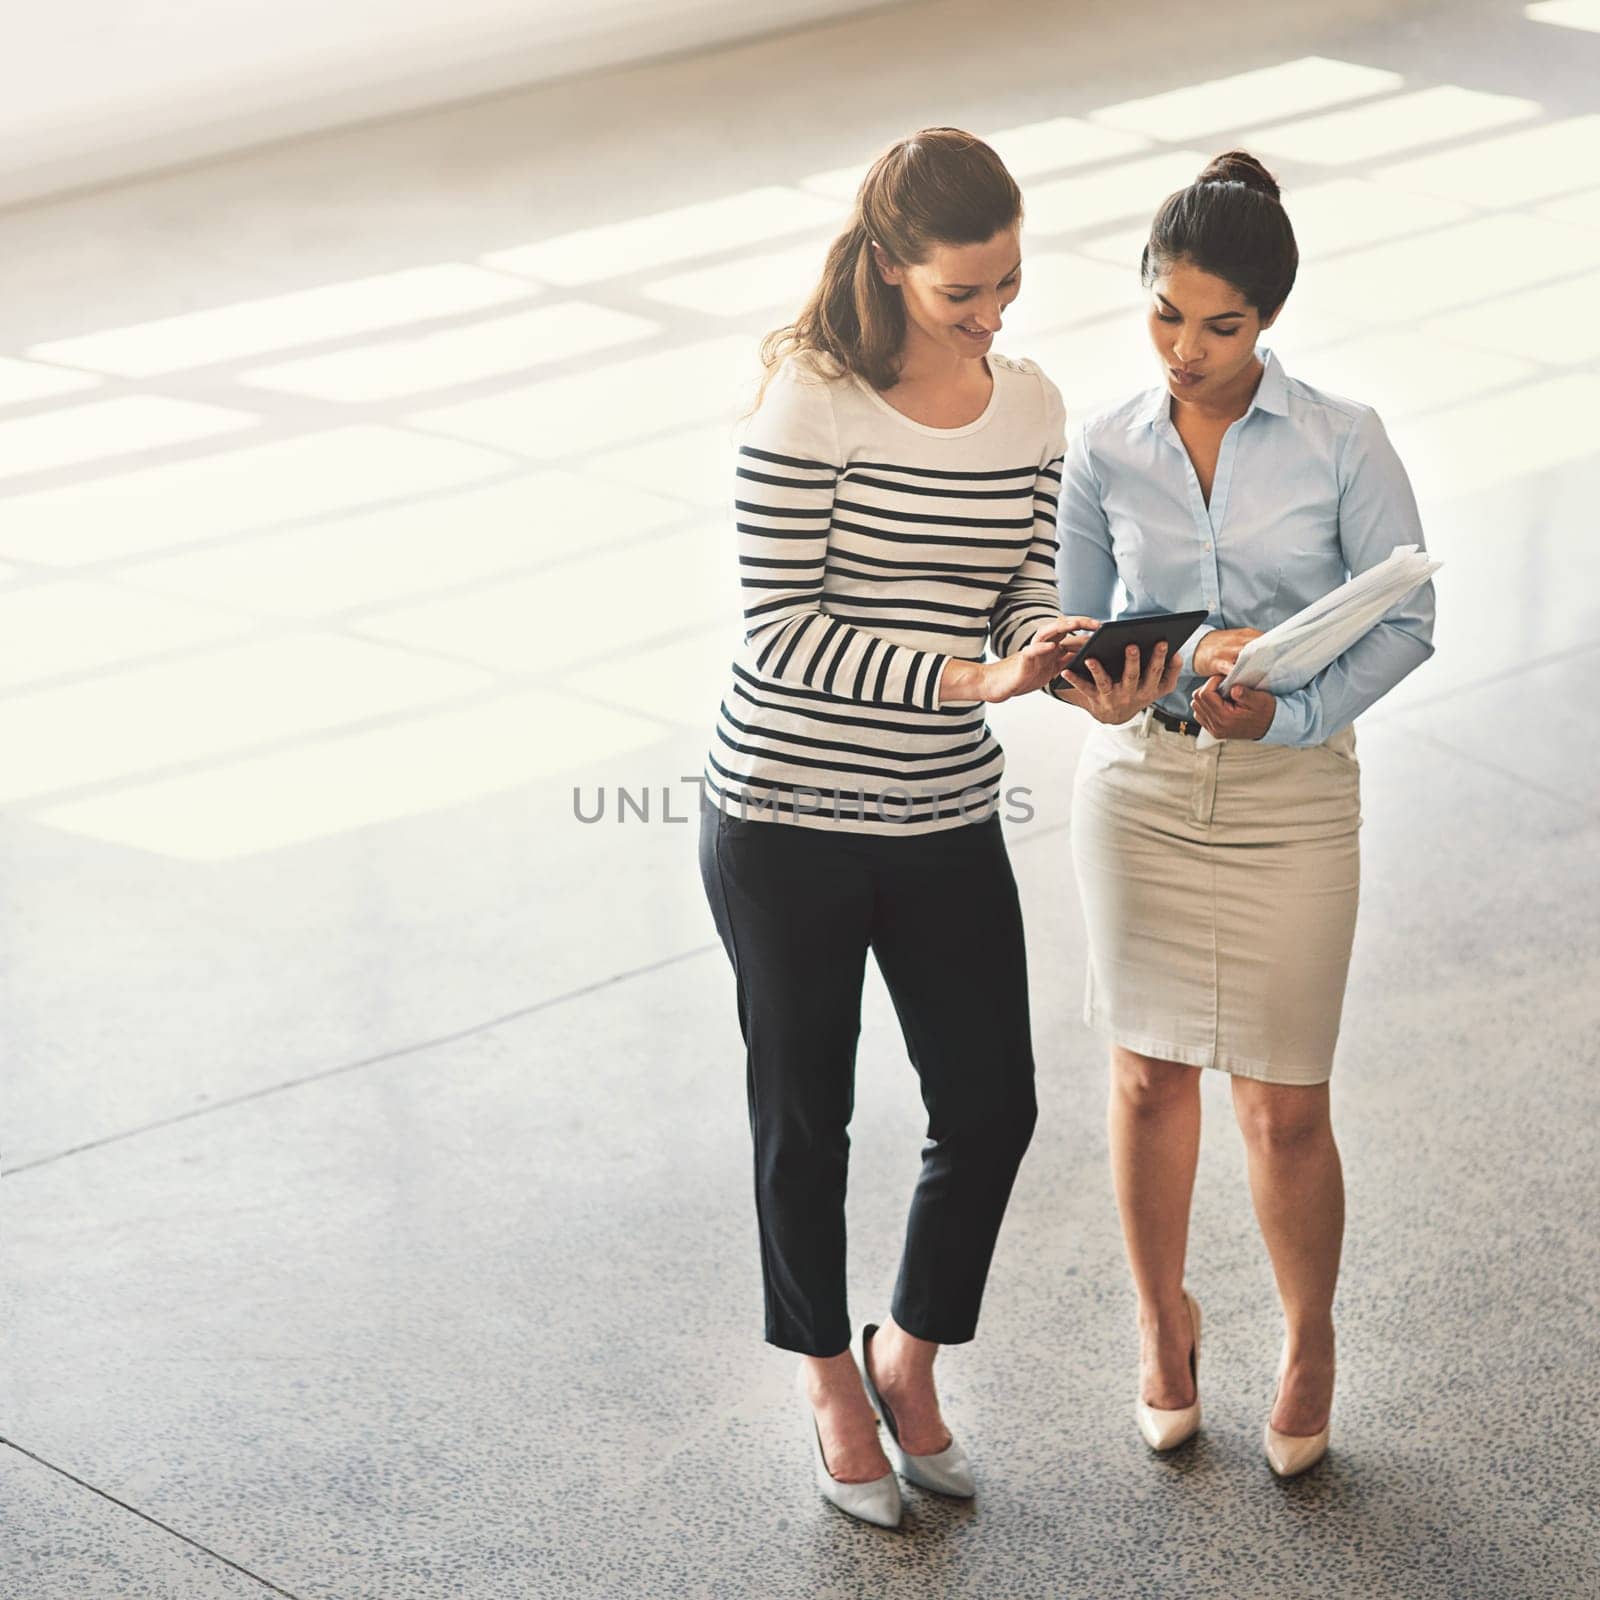 Comparing digital and analog ideas. High angle shot of two businesswomen talking together while standing in an office lobby